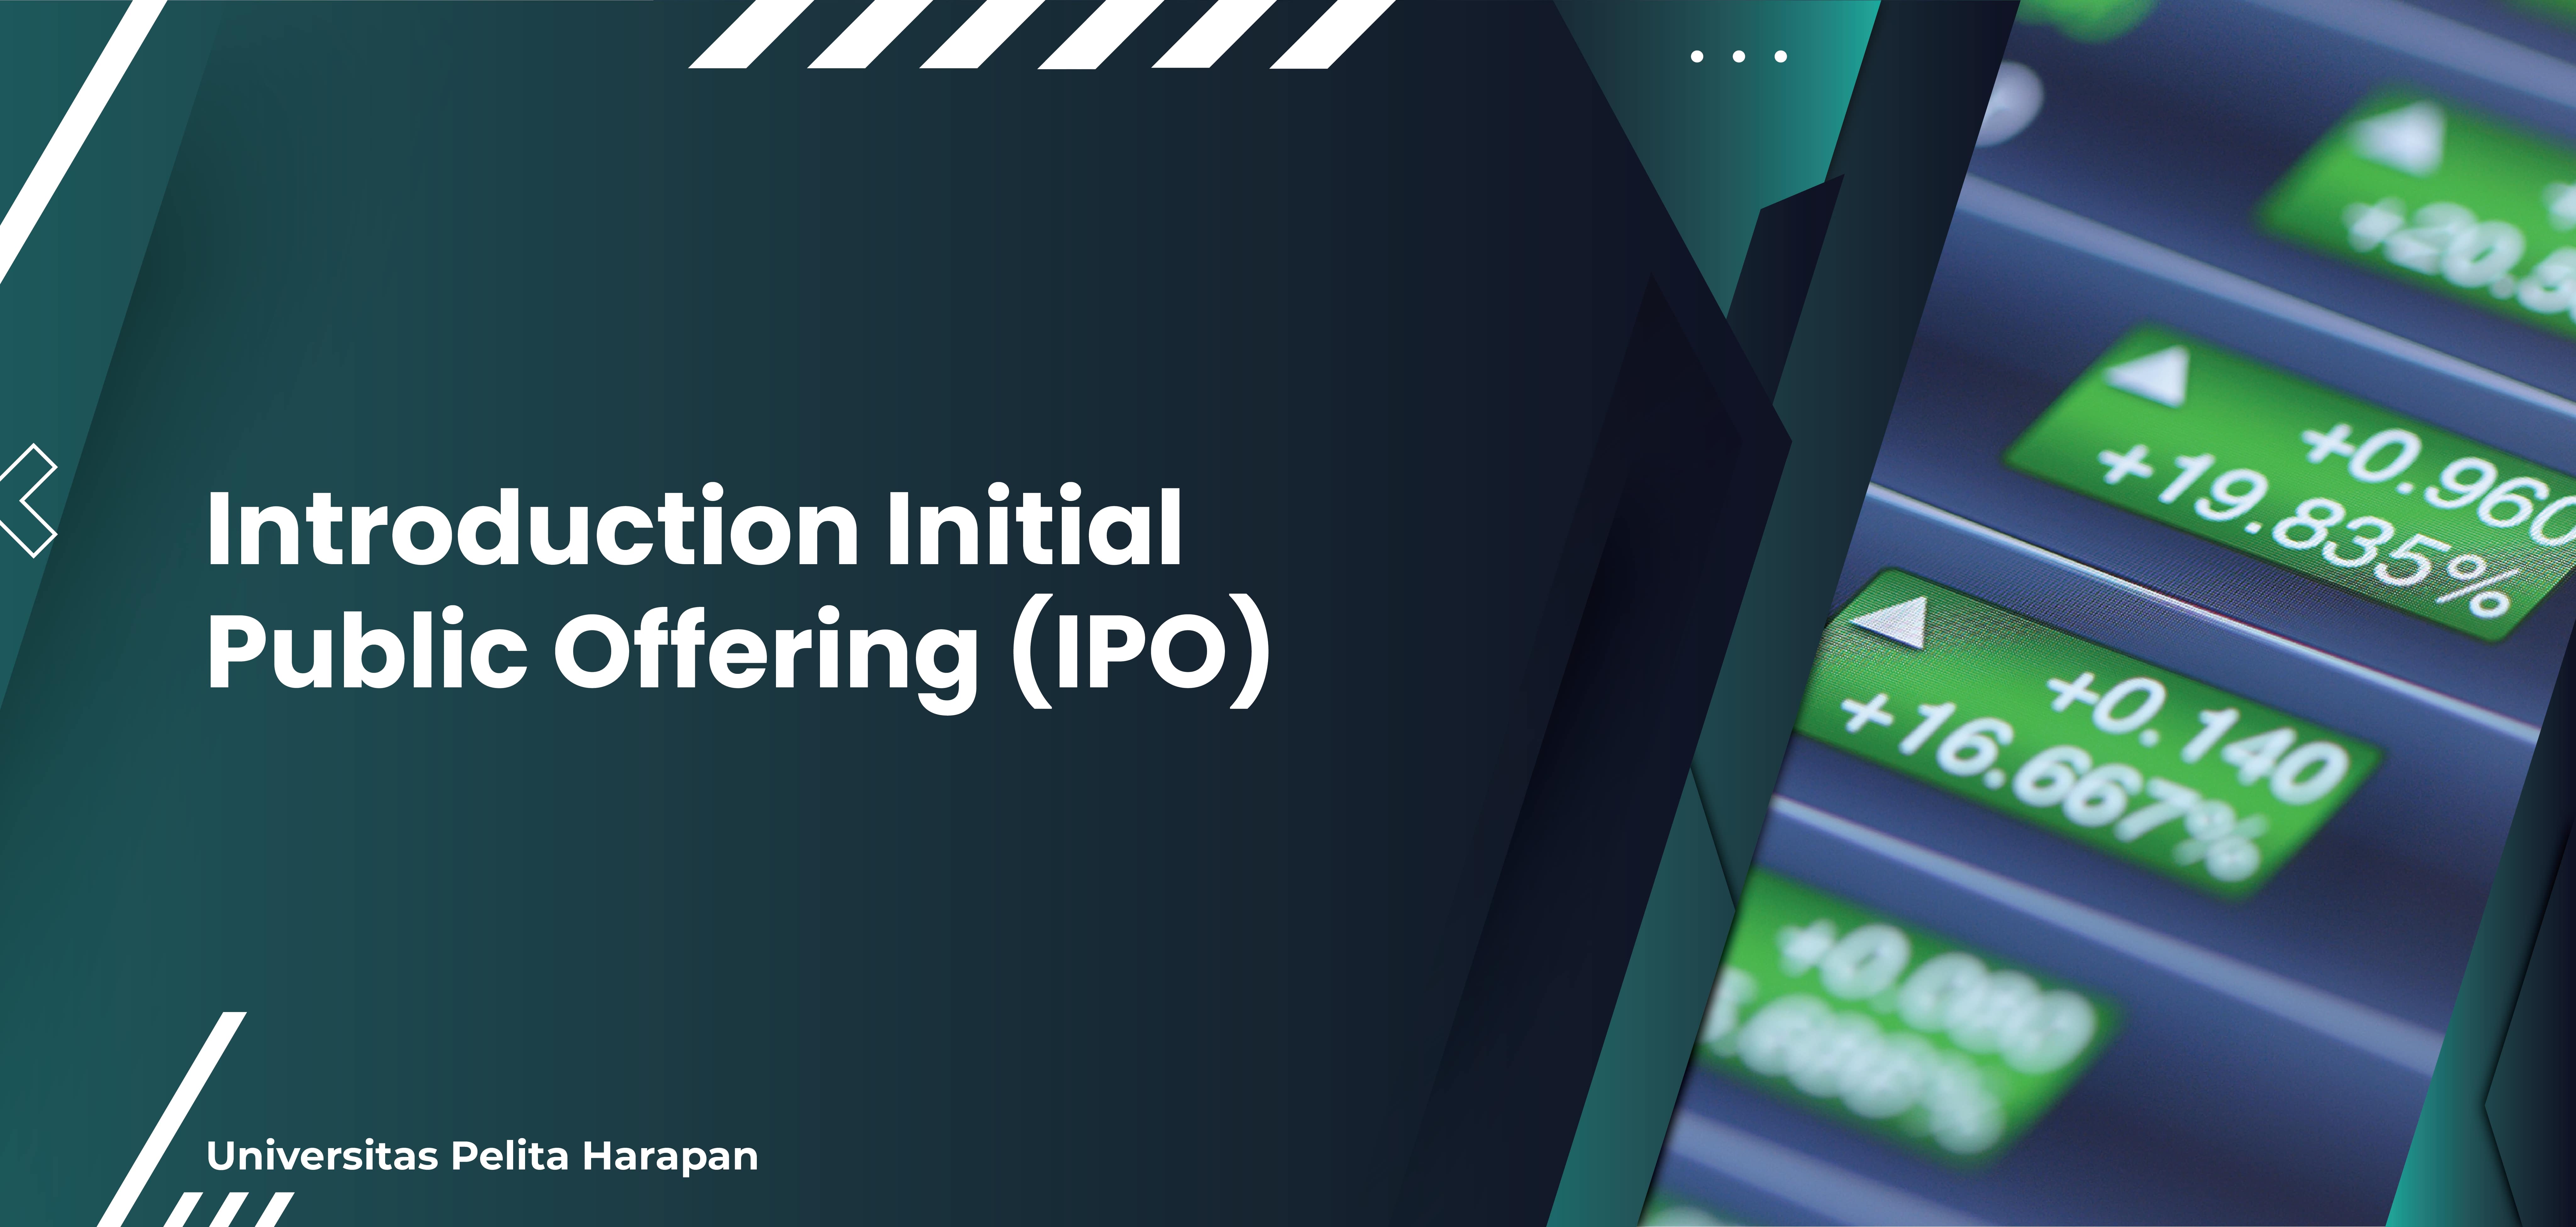 Introduction Initial Public Offering (IPO)